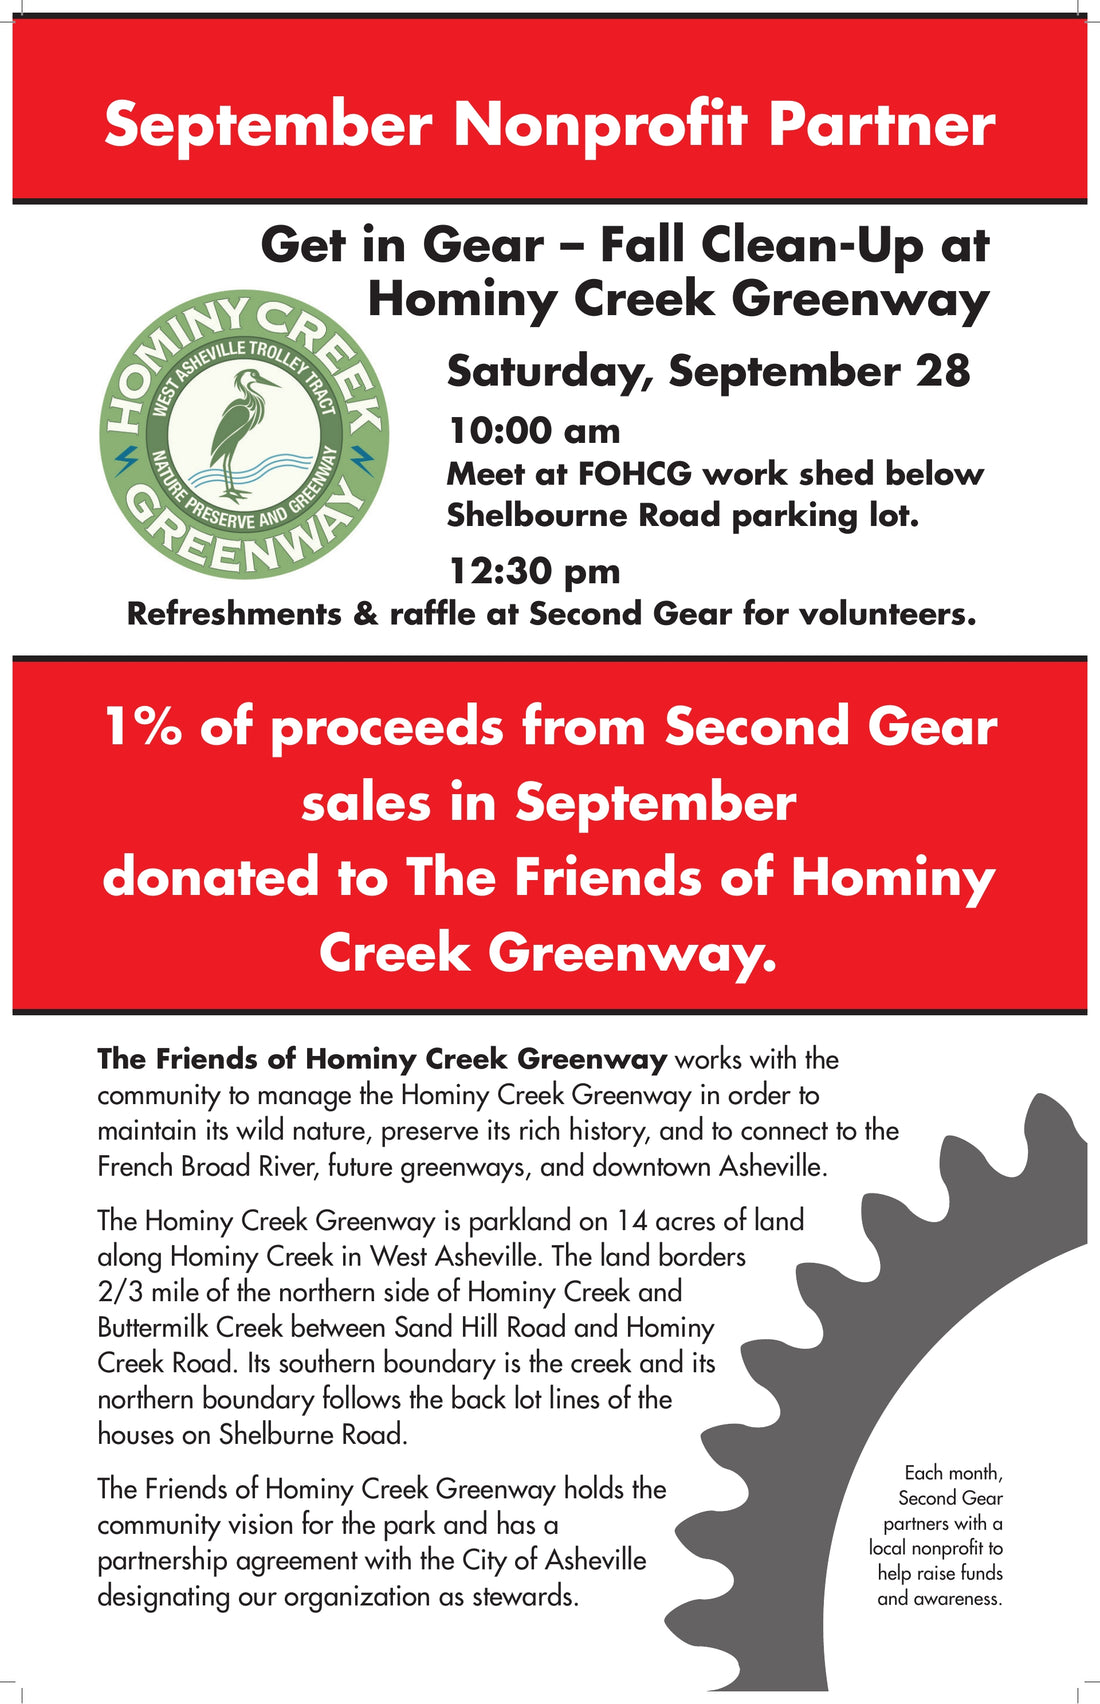 Friends of Hominy Creek Greenway River Clean Up, Saturday, September 28